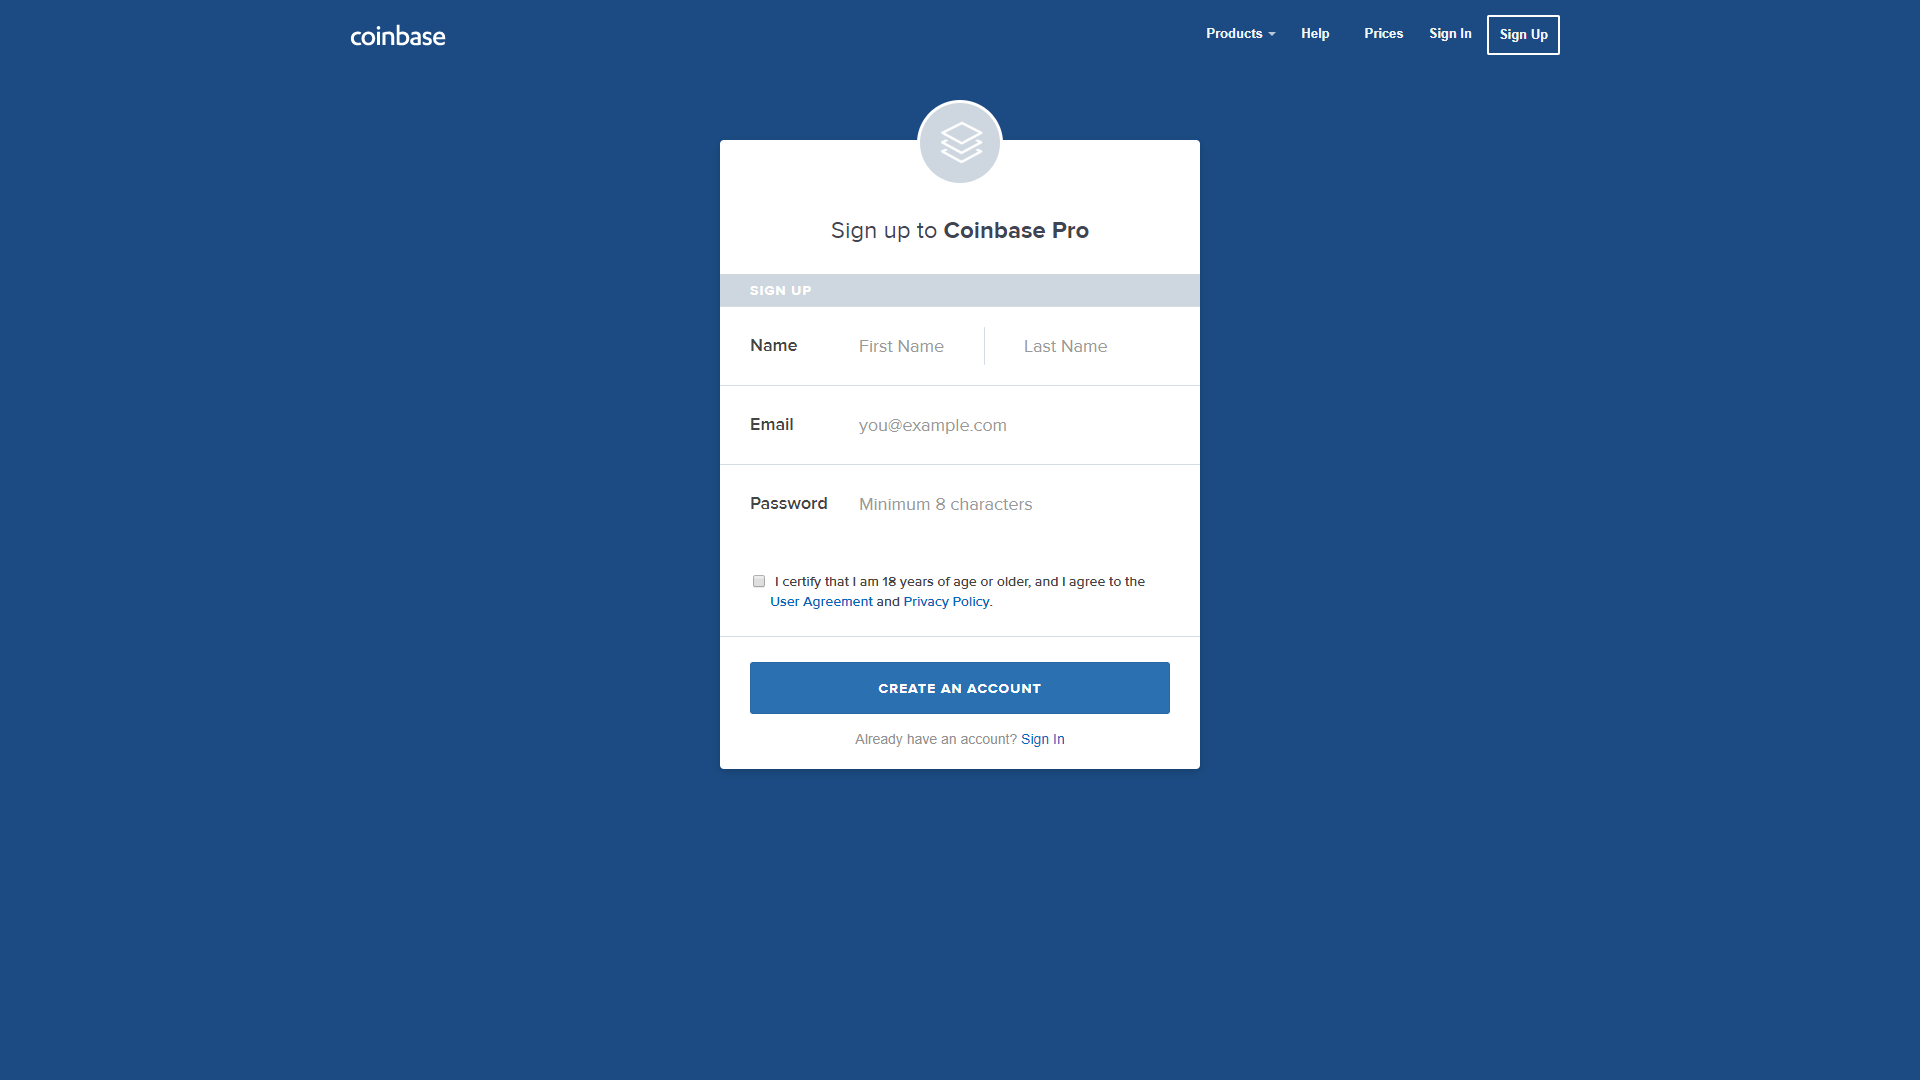 Coinbase Pro Review - Are The Fees Too High? (2020 Update)